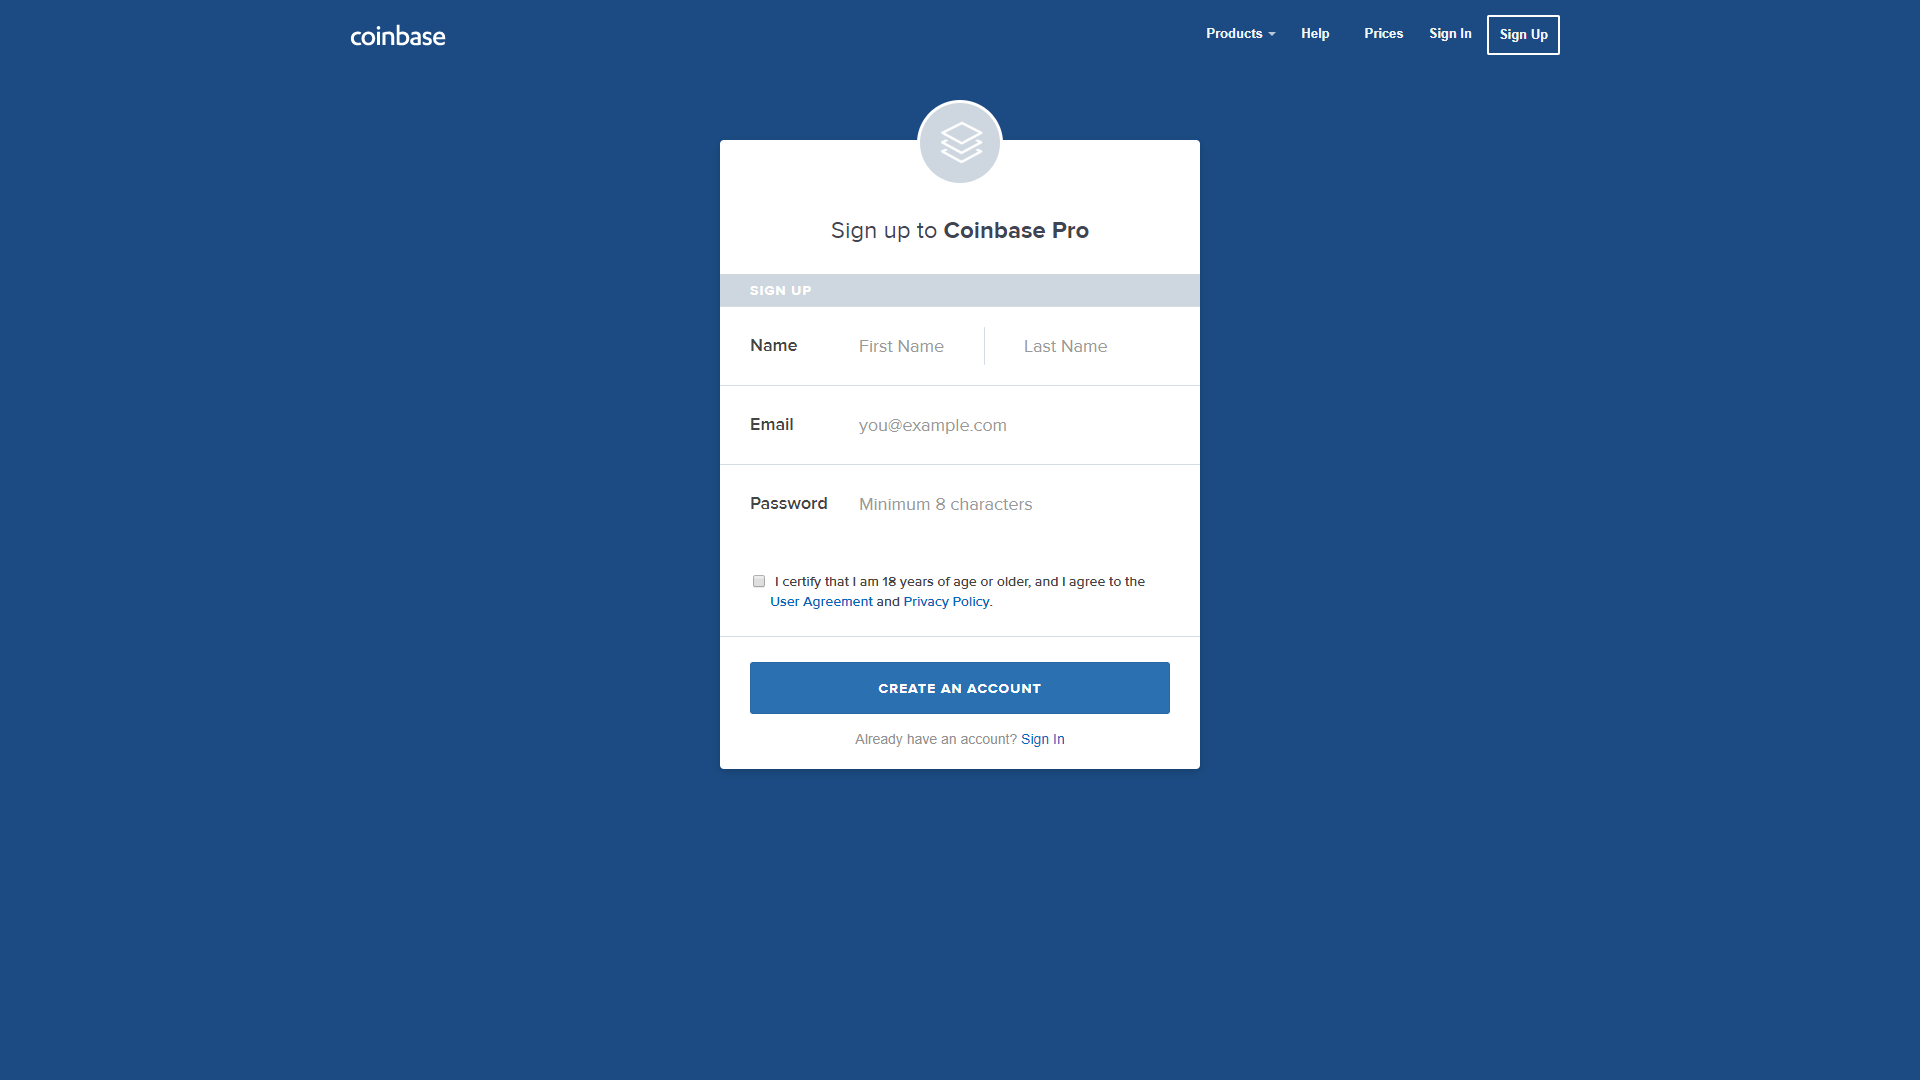 Coinbase Pro Review - Are The Fees Too High? (2020 Update)